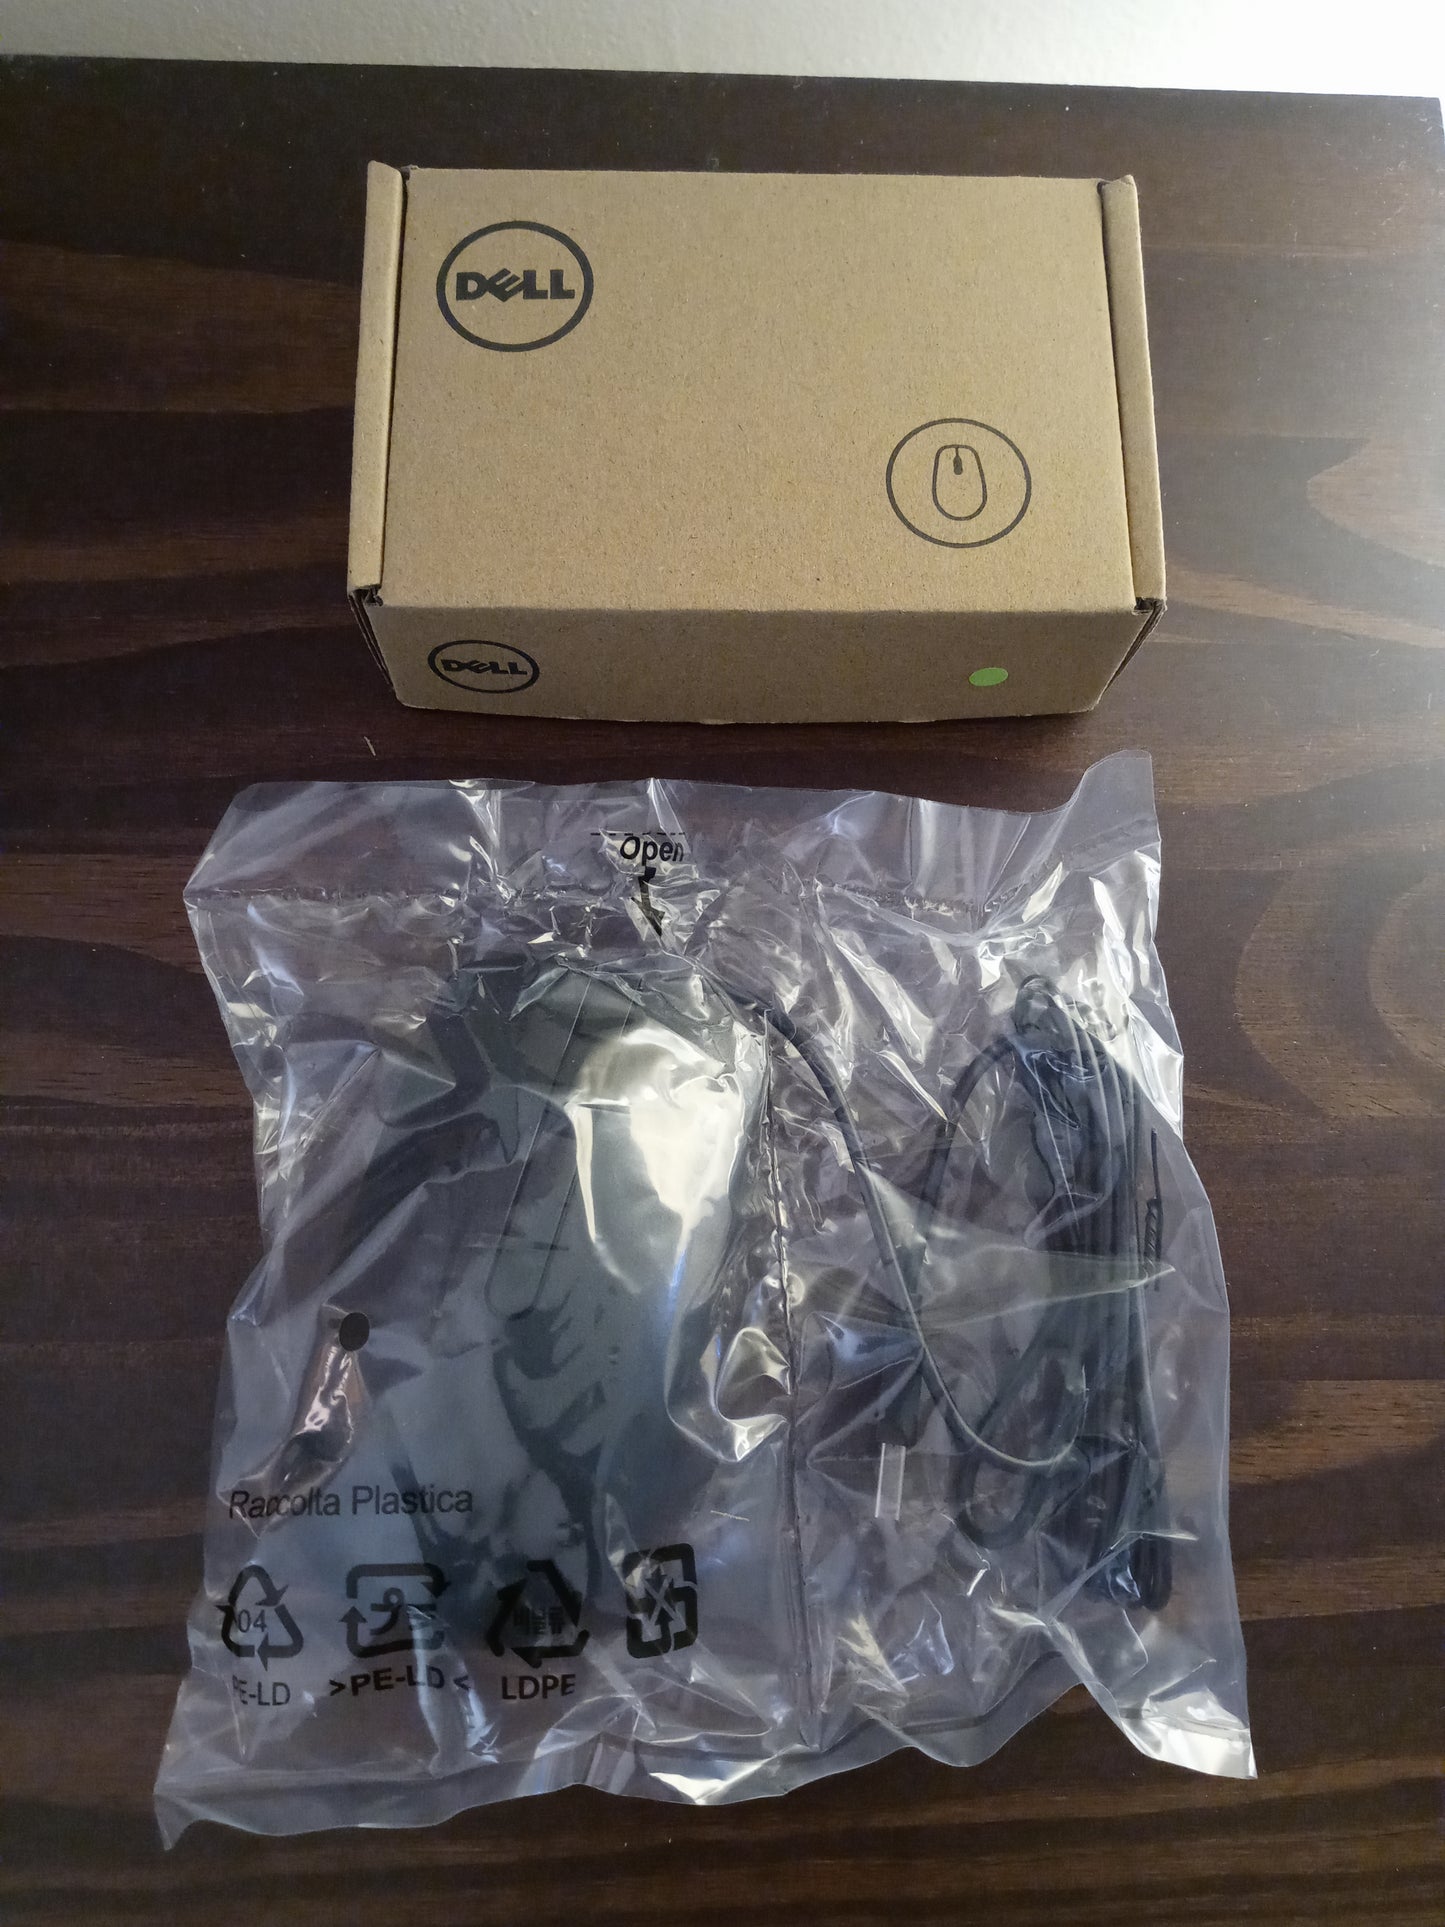 Dell Optical Mouse MS116 (75-BBCB)